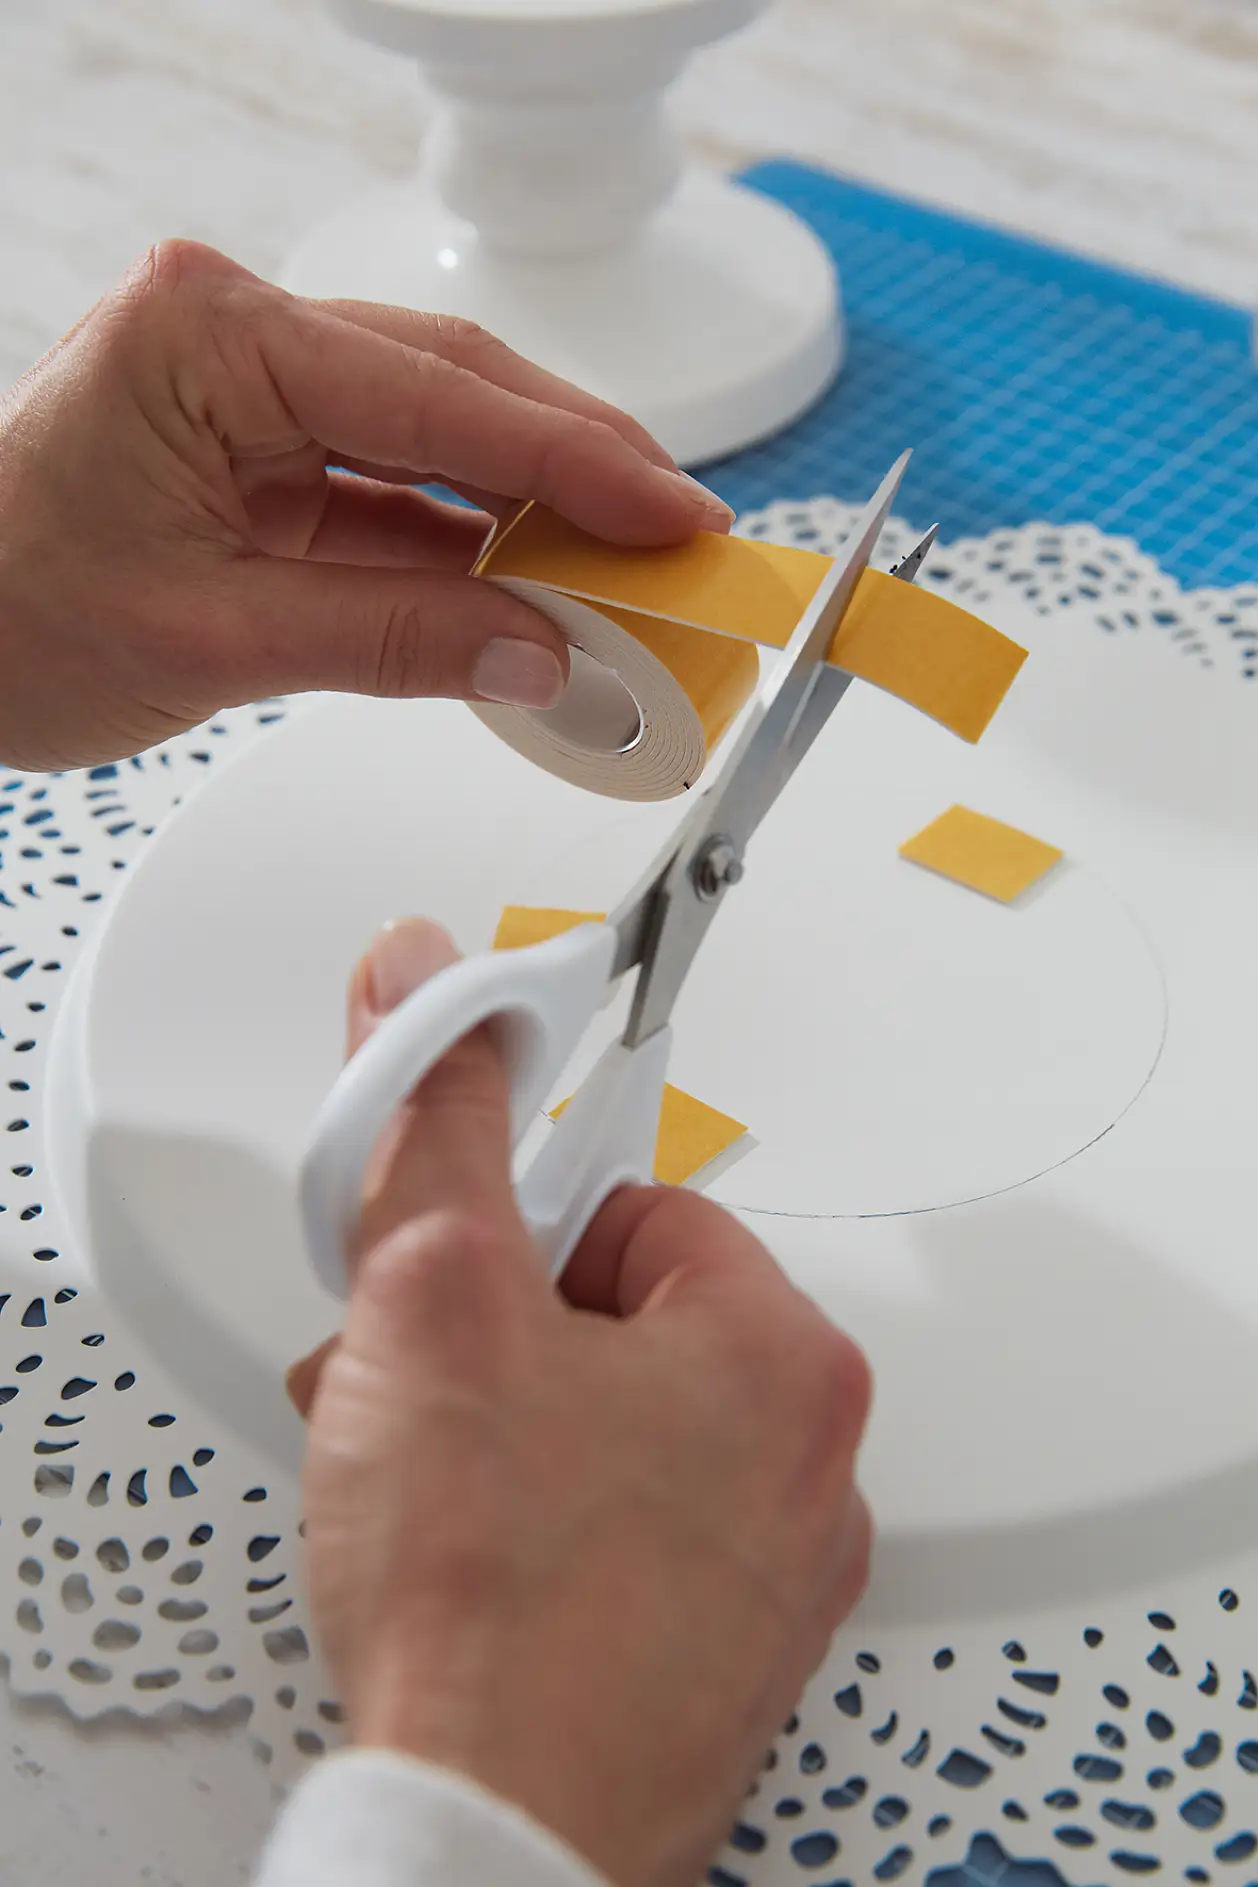 Cut small pieces of tesa Powerbond® INDOOR and stick them on the plate along the pen line. Be careful not to touch the adhesive on the tape.